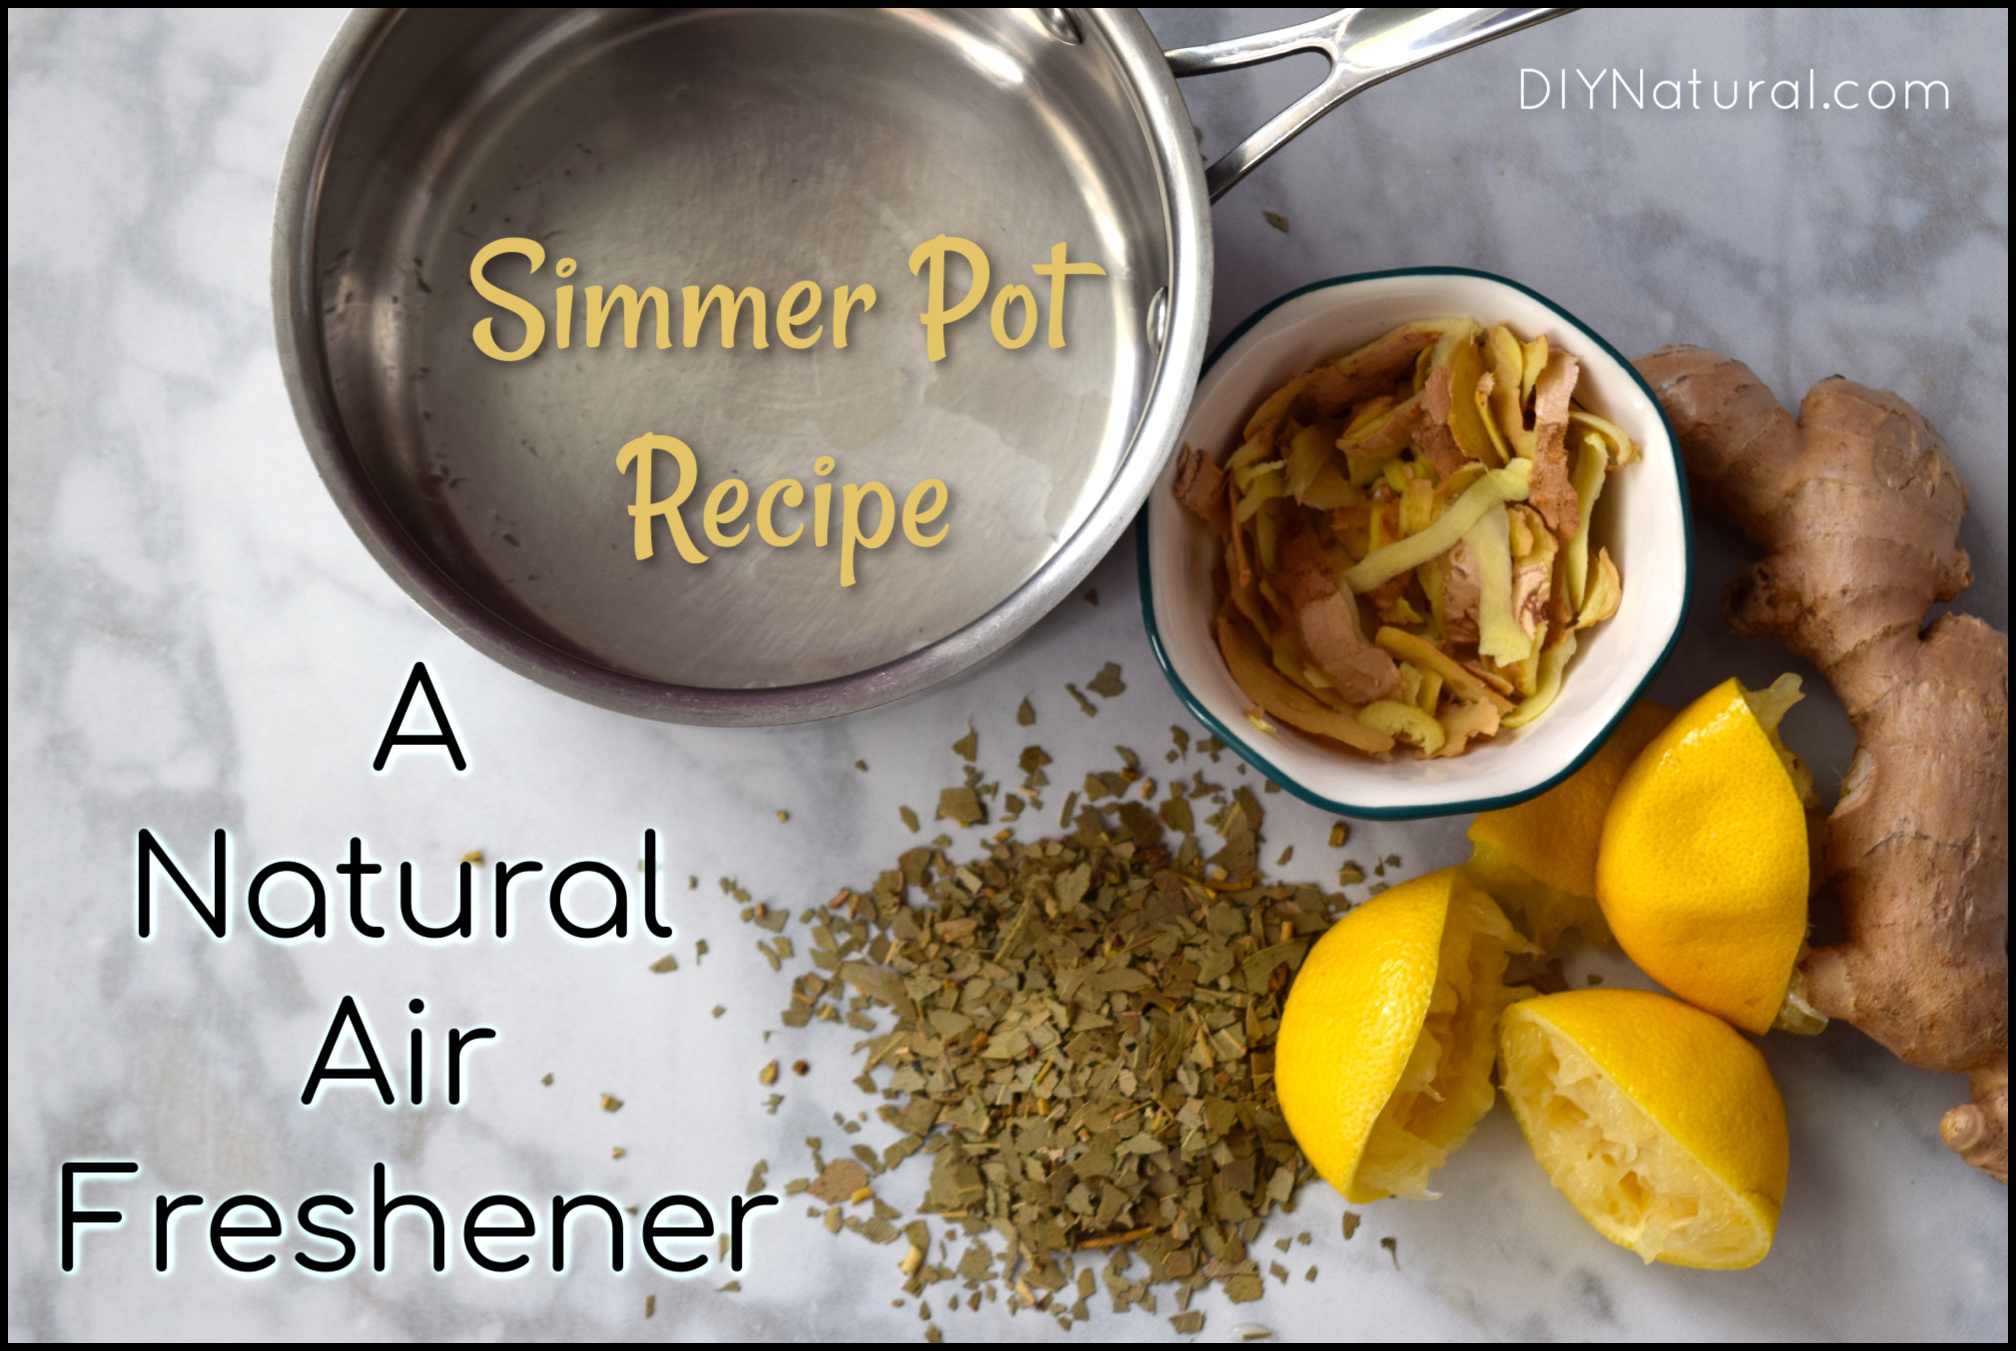 Lets try and electric simmer pot ⚡️#simmerpot #herbs #aromatherapy #wi